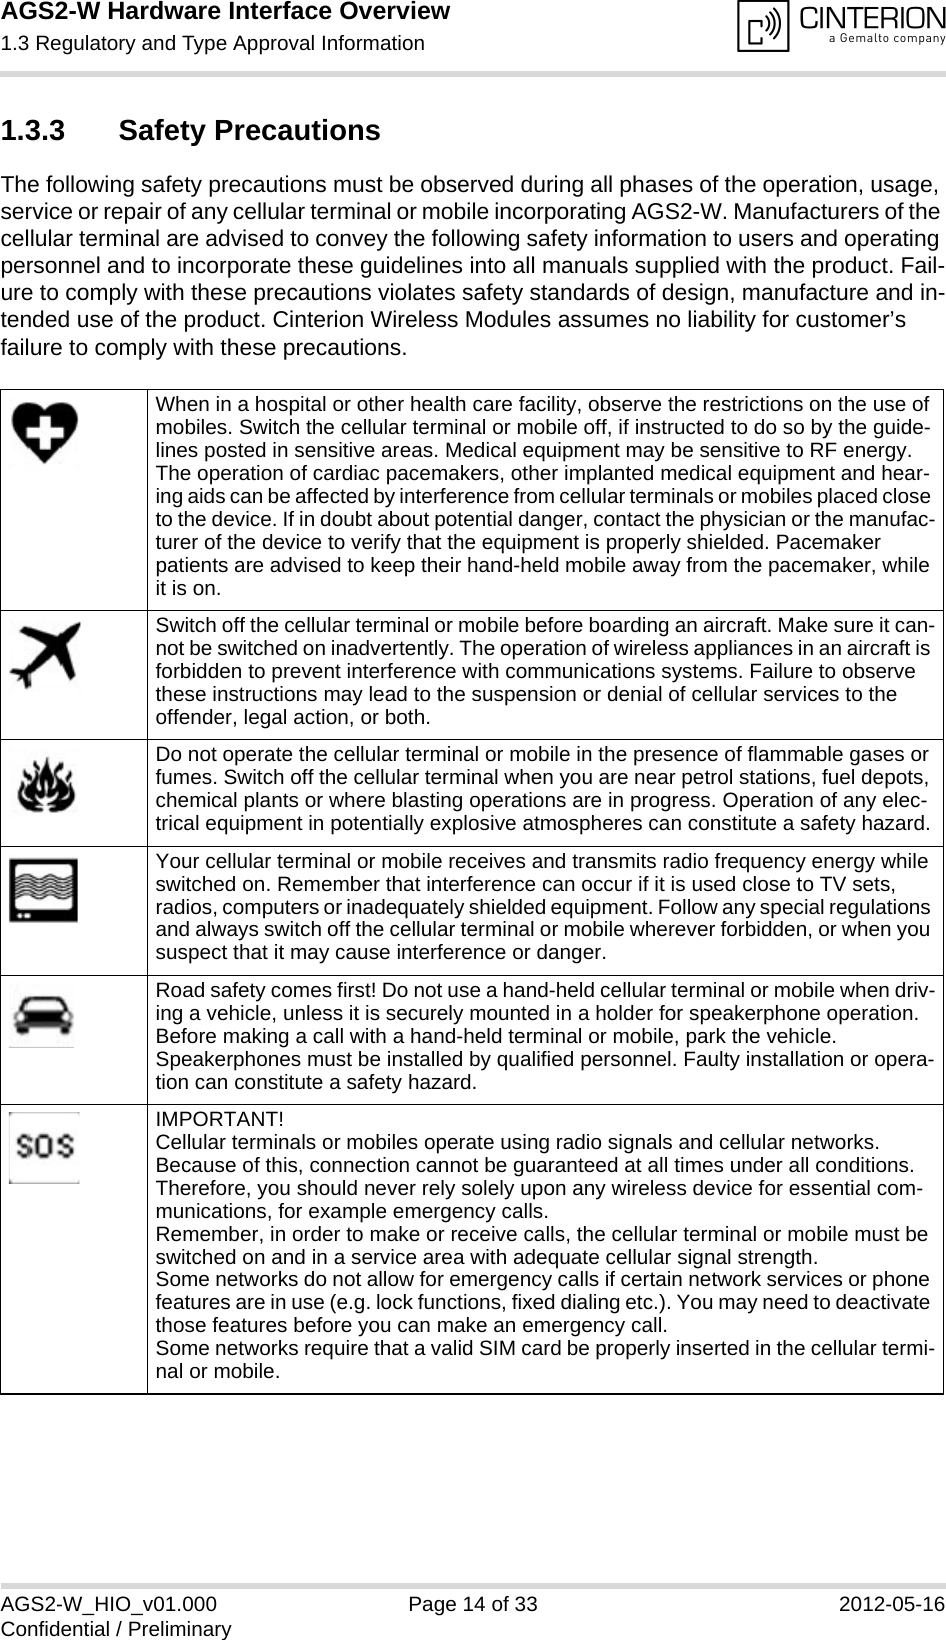 AGS2-W Hardware Interface Overview1.3 Regulatory and Type Approval Information14AGS2-W_HIO_v01.000 Page 14 of 33 2012-05-16Confidential / Preliminary1.3.3 Safety PrecautionsThe following safety precautions must be observed during all phases of the operation, usage, service or repair of any cellular terminal or mobile incorporating AGS2-W. Manufacturers of the cellular terminal are advised to convey the following safety information to users and operating personnel and to incorporate these guidelines into all manuals supplied with the product. Fail-ure to comply with these precautions violates safety standards of design, manufacture and in-tended use of the product. Cinterion Wireless Modules assumes no liability for customer’s failure to comply with these precautions.When in a hospital or other health care facility, observe the restrictions on the use of mobiles. Switch the cellular terminal or mobile off, if instructed to do so by the guide-lines posted in sensitive areas. Medical equipment may be sensitive to RF energy. The operation of cardiac pacemakers, other implanted medical equipment and hear-ing aids can be affected by interference from cellular terminals or mobiles placed close to the device. If in doubt about potential danger, contact the physician or the manufac-turer of the device to verify that the equipment is properly shielded. Pacemaker patients are advised to keep their hand-held mobile away from the pacemaker, while it is on. Switch off the cellular terminal or mobile before boarding an aircraft. Make sure it can-not be switched on inadvertently. The operation of wireless appliances in an aircraft is forbidden to prevent interference with communications systems. Failure to observe these instructions may lead to the suspension or denial of cellular services to the offender, legal action, or both.Do not operate the cellular terminal or mobile in the presence of flammable gases or fumes. Switch off the cellular terminal when you are near petrol stations, fuel depots, chemical plants or where blasting operations are in progress. Operation of any elec-trical equipment in potentially explosive atmospheres can constitute a safety hazard.Your cellular terminal or mobile receives and transmits radio frequency energy while switched on. Remember that interference can occur if it is used close to TV sets, radios, computers or inadequately shielded equipment. Follow any special regulations and always switch off the cellular terminal or mobile wherever forbidden, or when you suspect that it may cause interference or danger.Road safety comes first! Do not use a hand-held cellular terminal or mobile when driv-ing a vehicle, unless it is securely mounted in a holder for speakerphone operation. Before making a call with a hand-held terminal or mobile, park the vehicle. Speakerphones must be installed by qualified personnel. Faulty installation or opera-tion can constitute a safety hazard.IMPORTANT!Cellular terminals or mobiles operate using radio signals and cellular networks. Because of this, connection cannot be guaranteed at all times under all conditions. Therefore, you should never rely solely upon any wireless device for essential com-munications, for example emergency calls. Remember, in order to make or receive calls, the cellular terminal or mobile must be switched on and in a service area with adequate cellular signal strength. Some networks do not allow for emergency calls if certain network services or phone features are in use (e.g. lock functions, fixed dialing etc.). You may need to deactivate those features before you can make an emergency call.Some networks require that a valid SIM card be properly inserted in the cellular termi-nal or mobile.